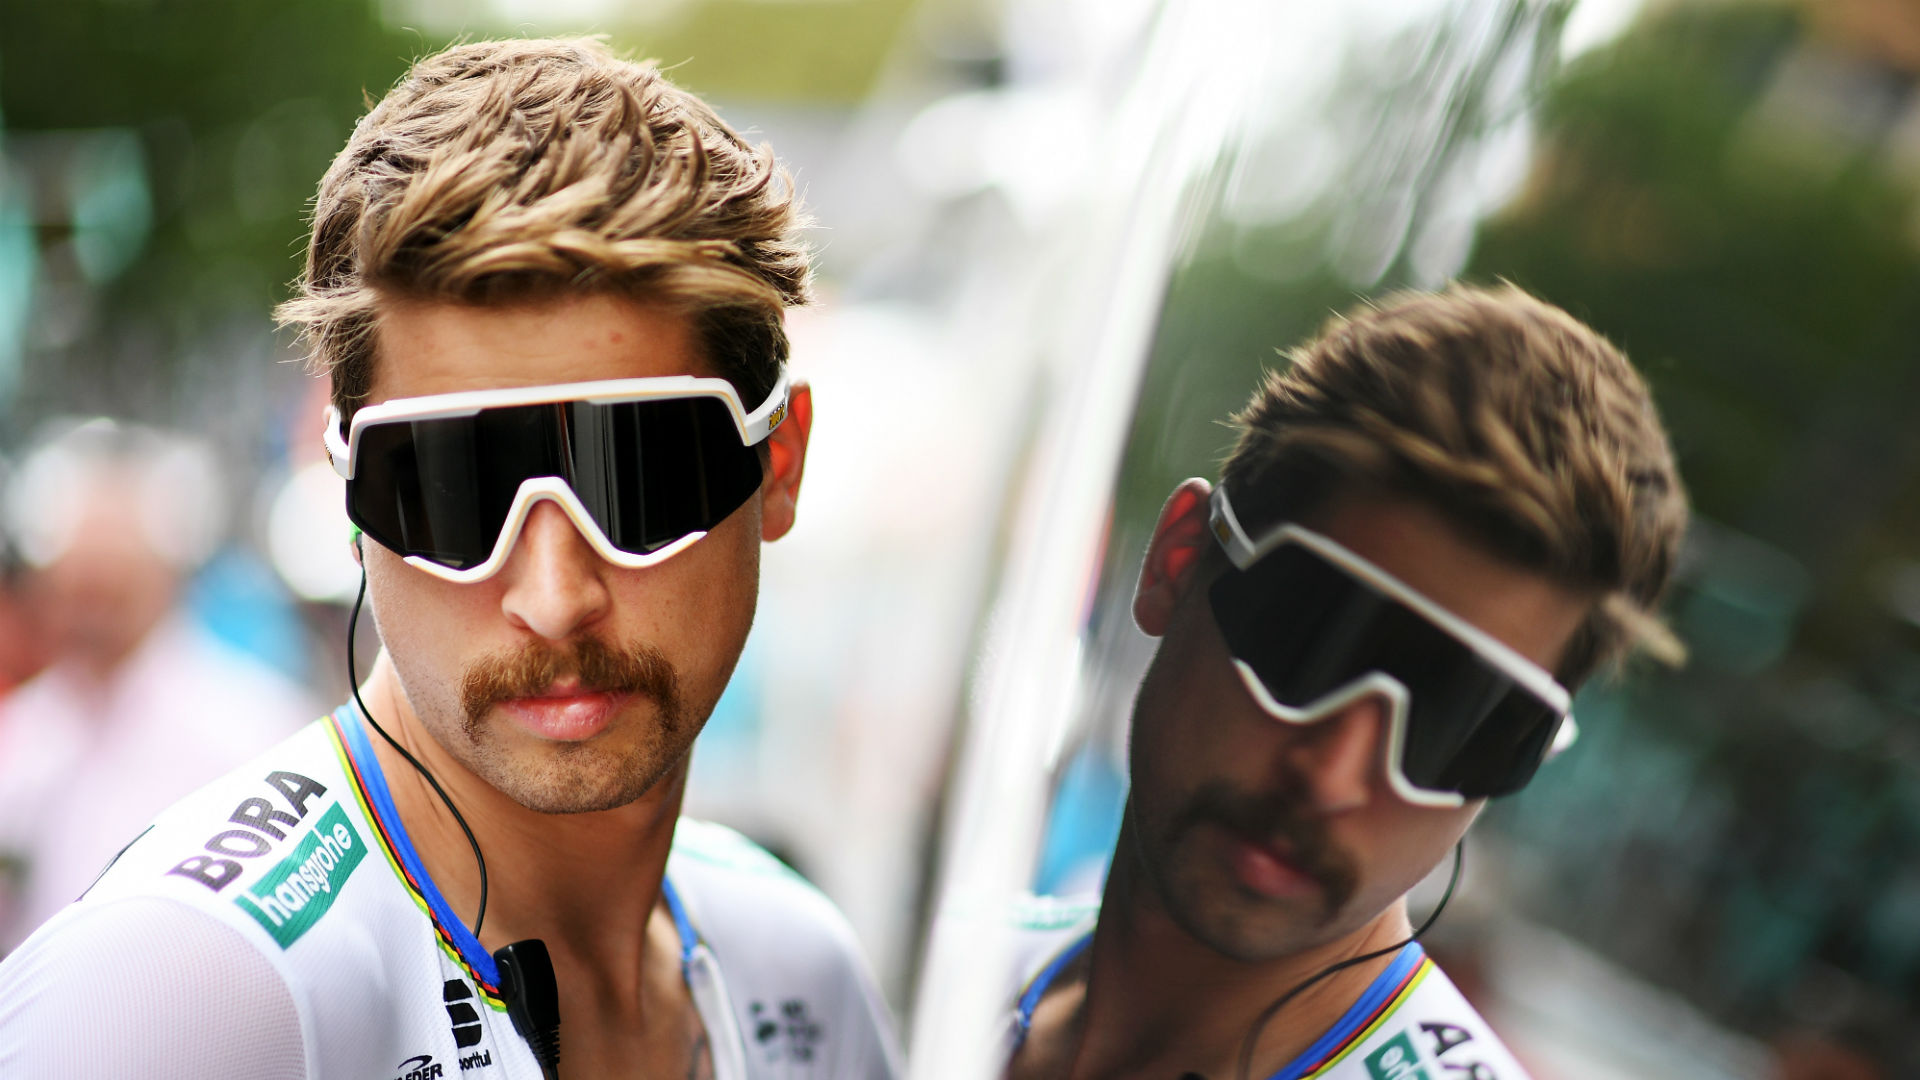 Bora-Hansgrohe's Peter Sagan rued being "close, but again not first" after finishing fourth at Milan-San Remo.